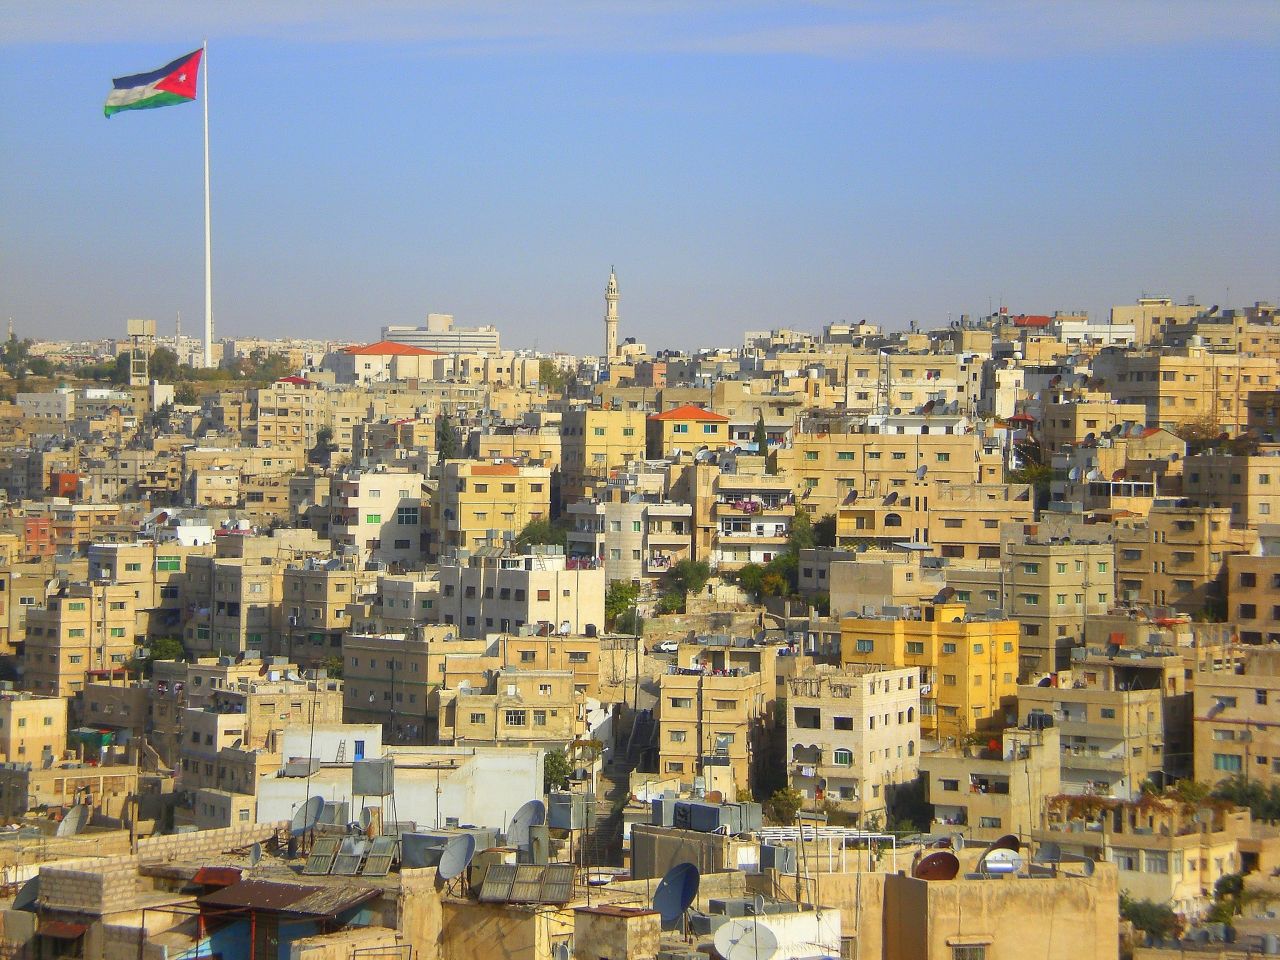 Jordanian cities such as Amman (pictured) don't suffer the car-horn cacophony prevalent in so many other Middle East countries.